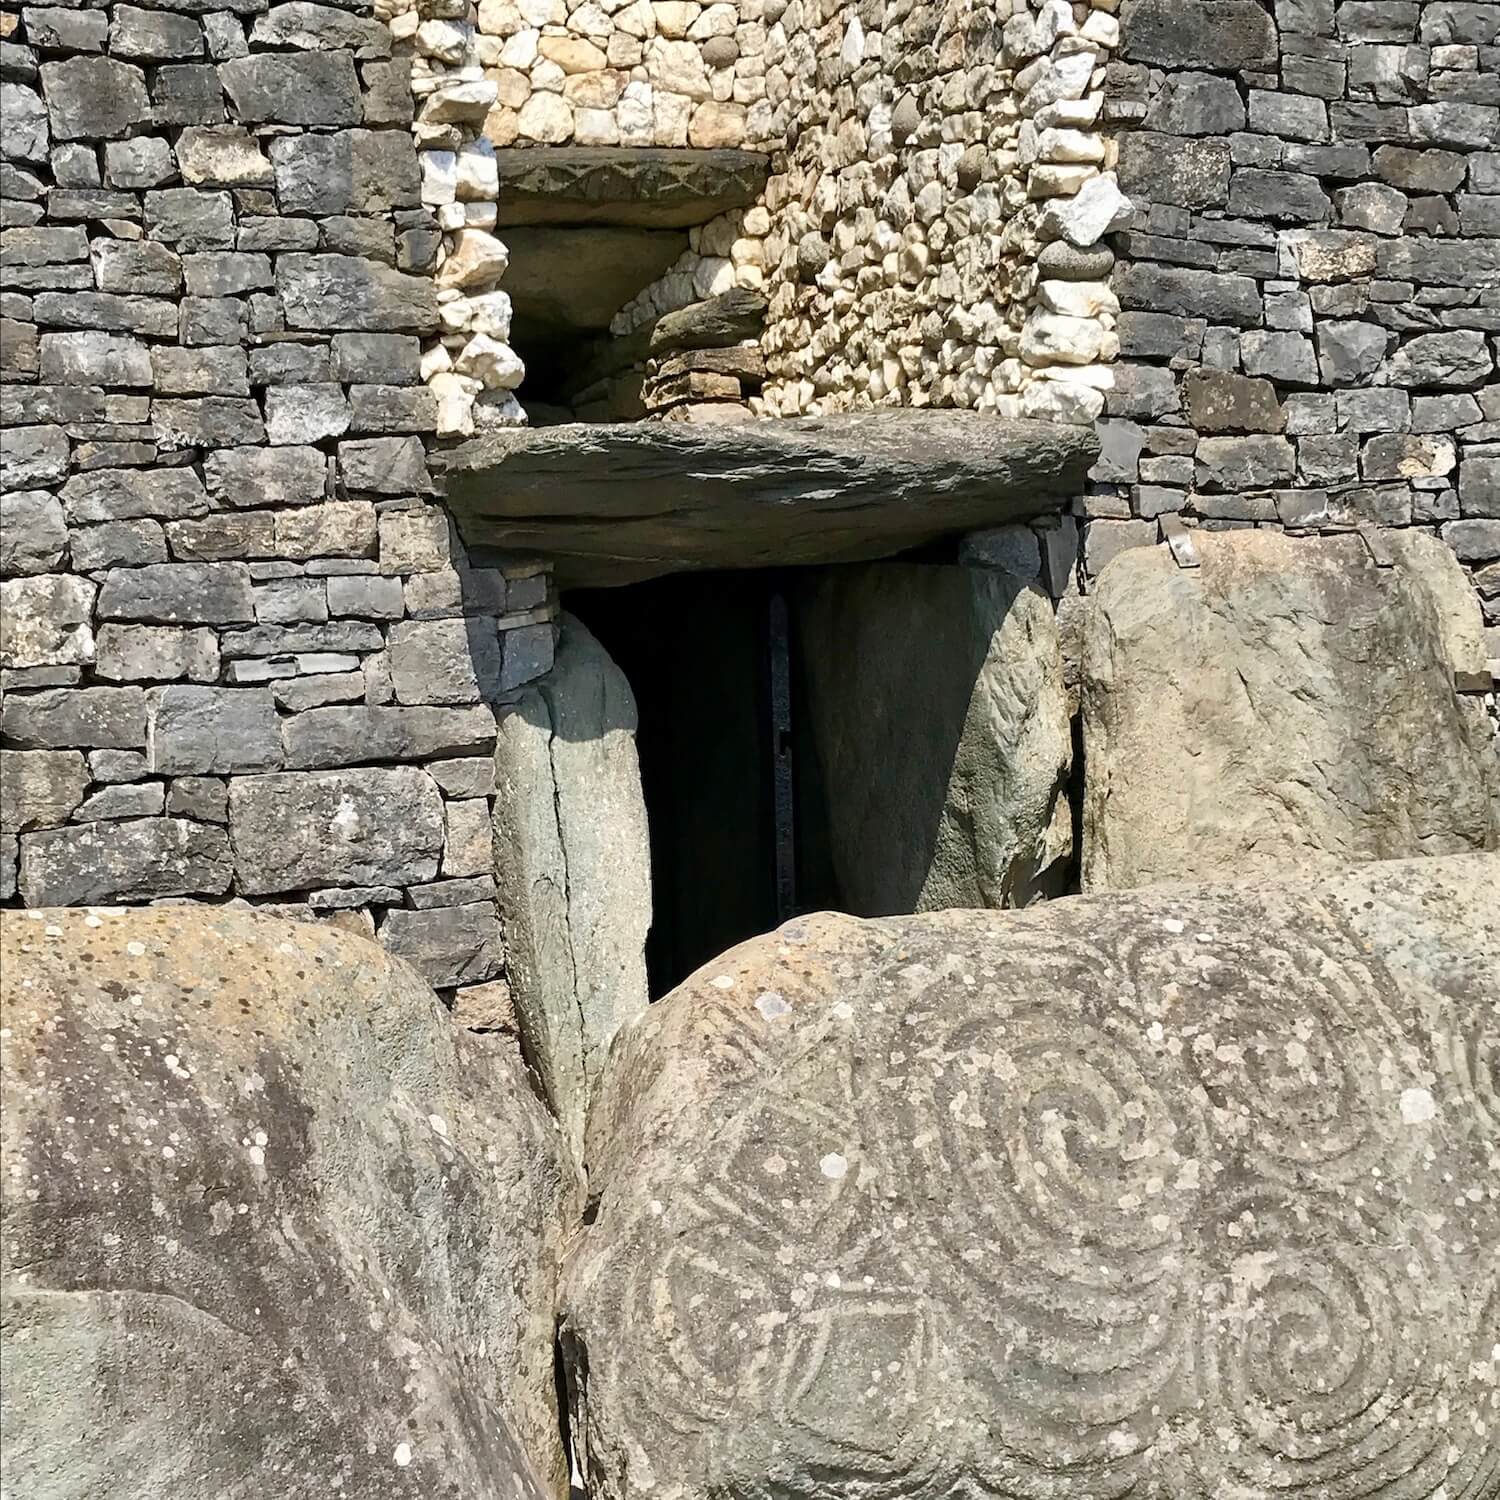 Hyroglifics etched in stones protect the ancient entrance to Newgrange site.